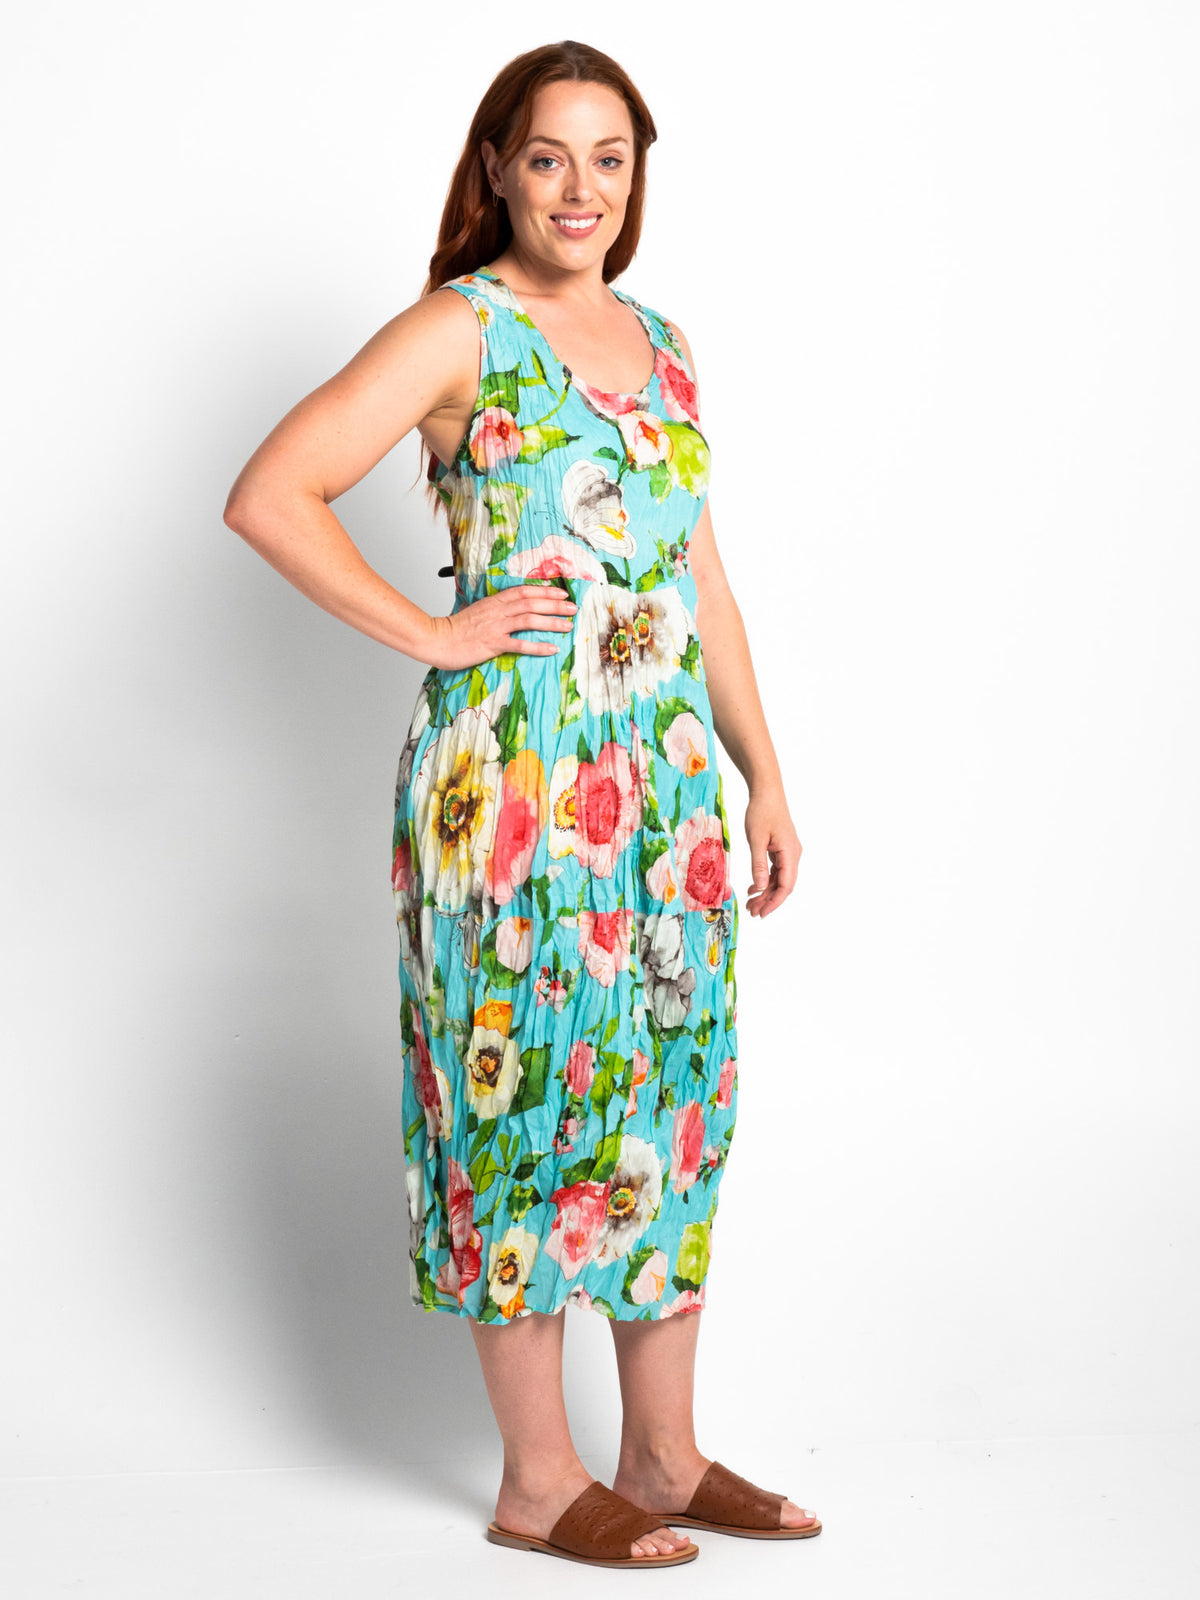 Glasshouse Free Size dress in Turquoise Pretty